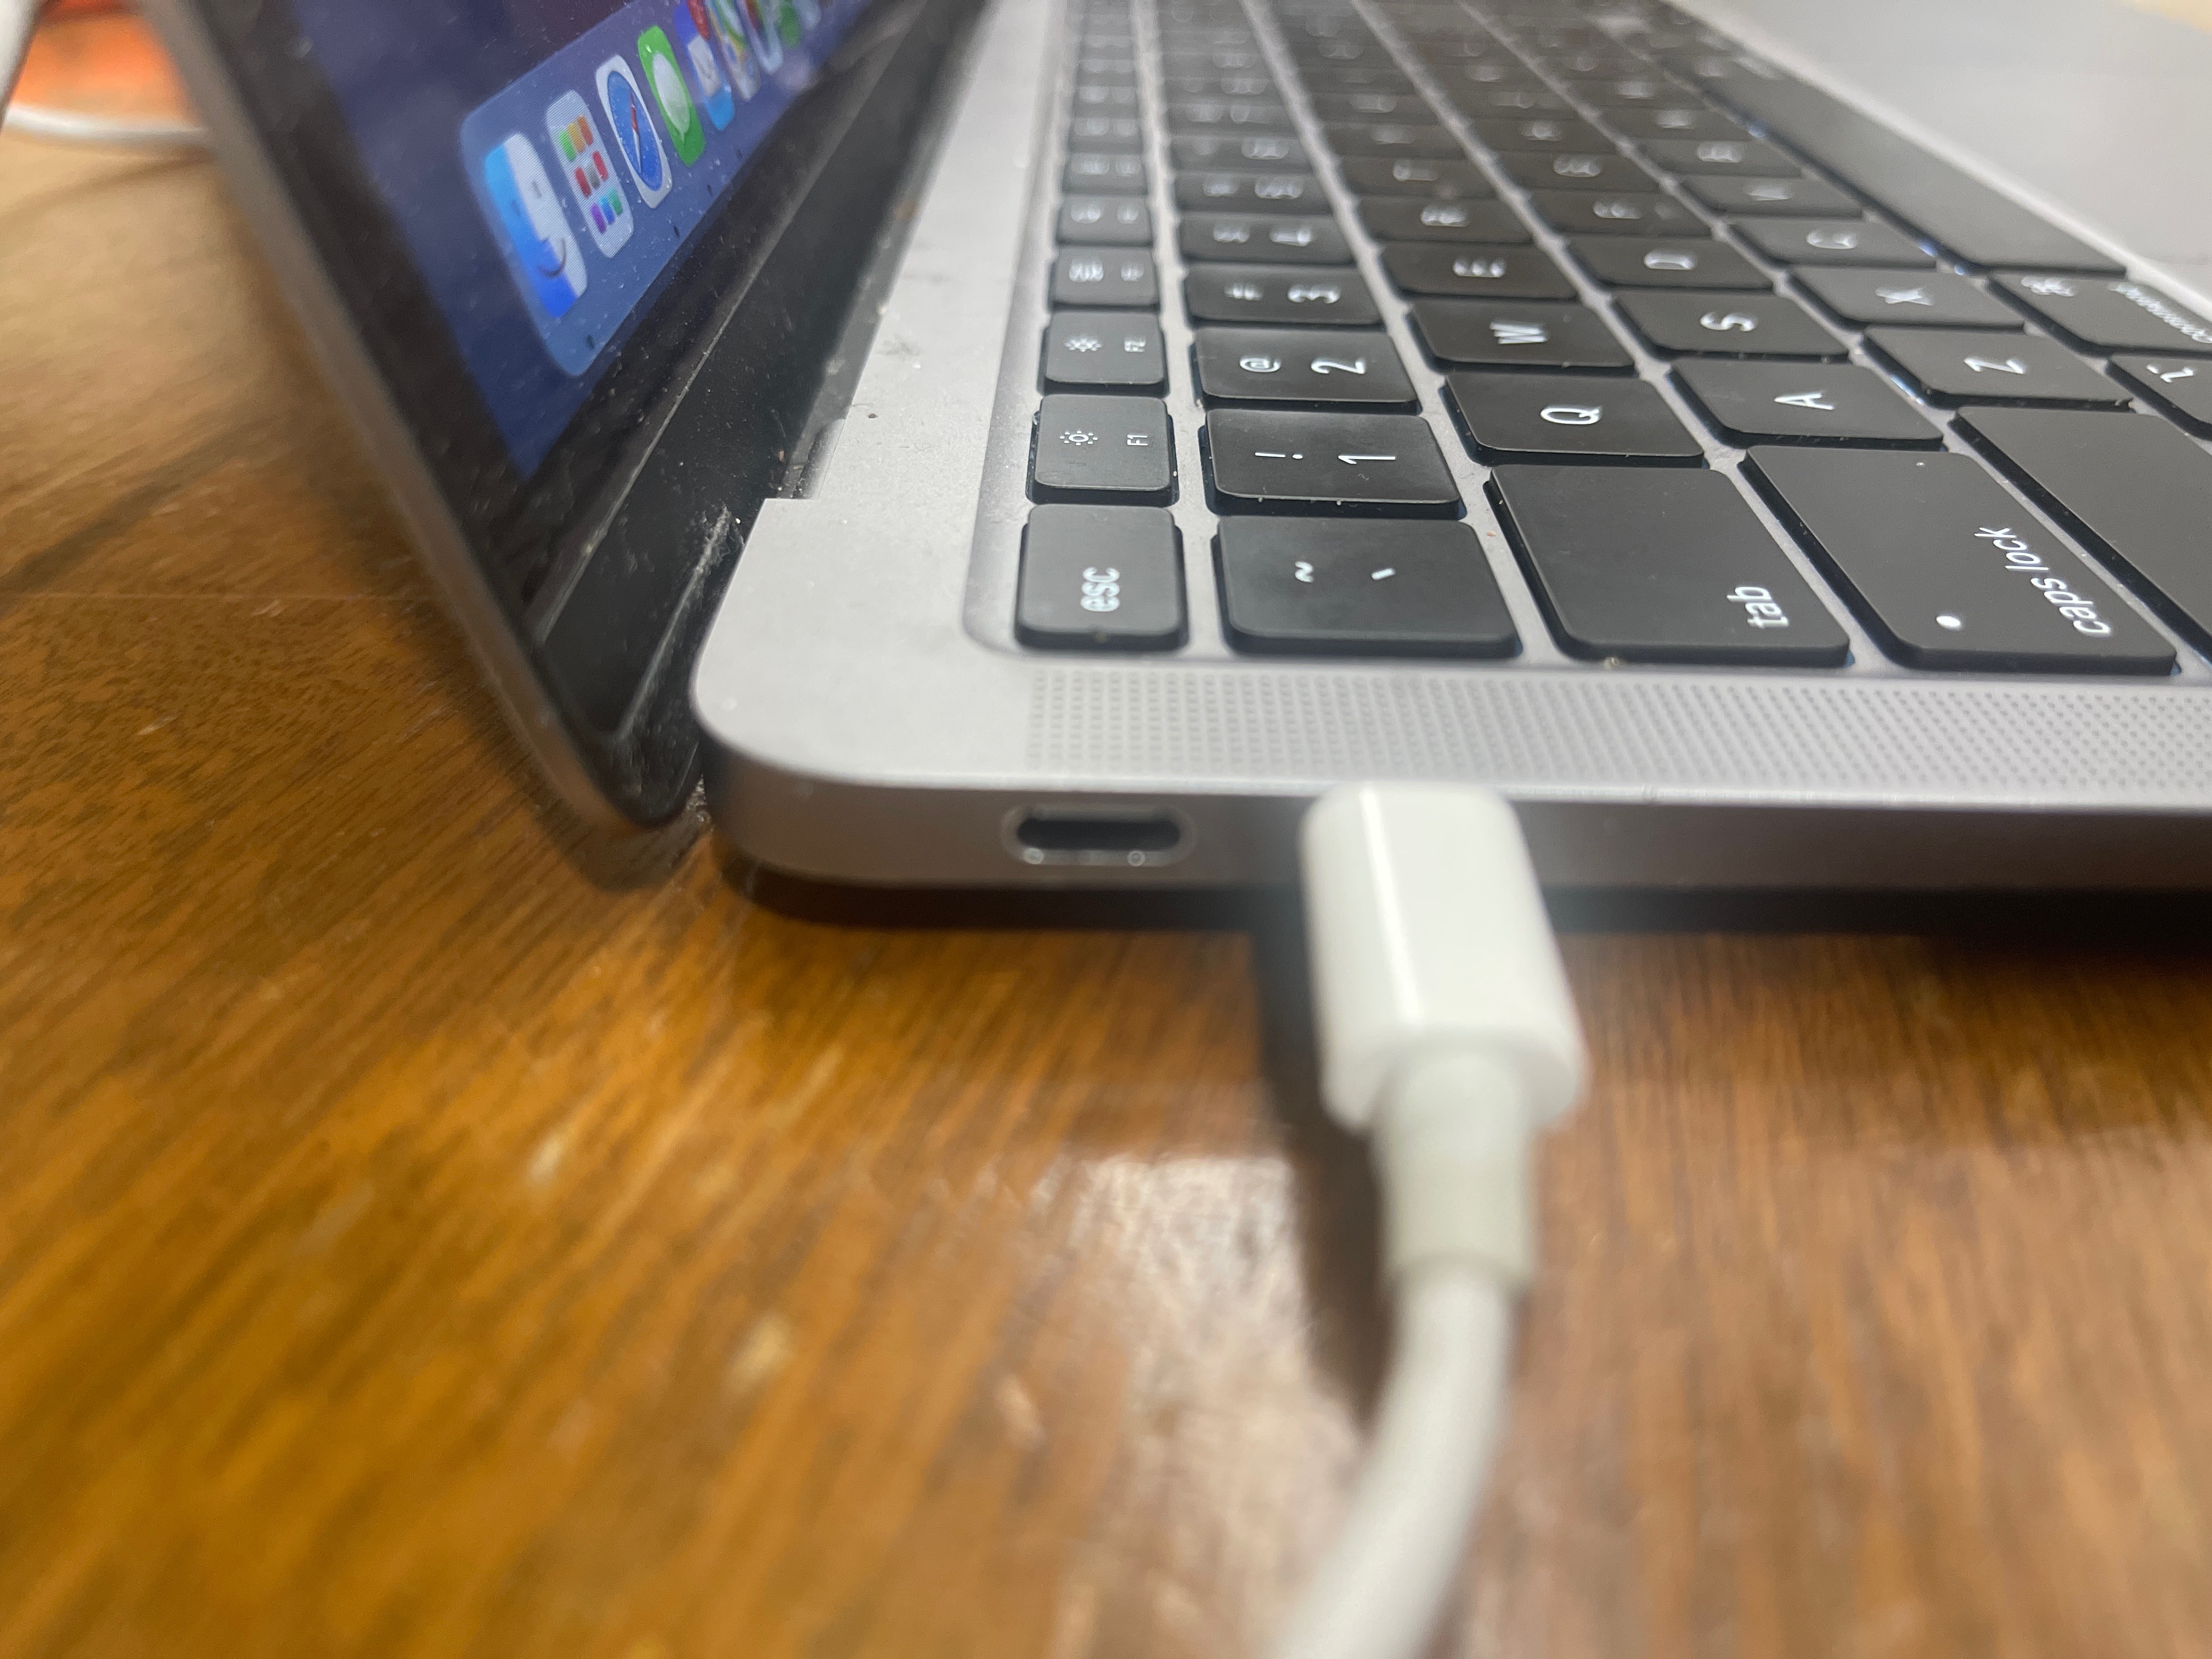 MacBook USB-C port not working? Here's what to do